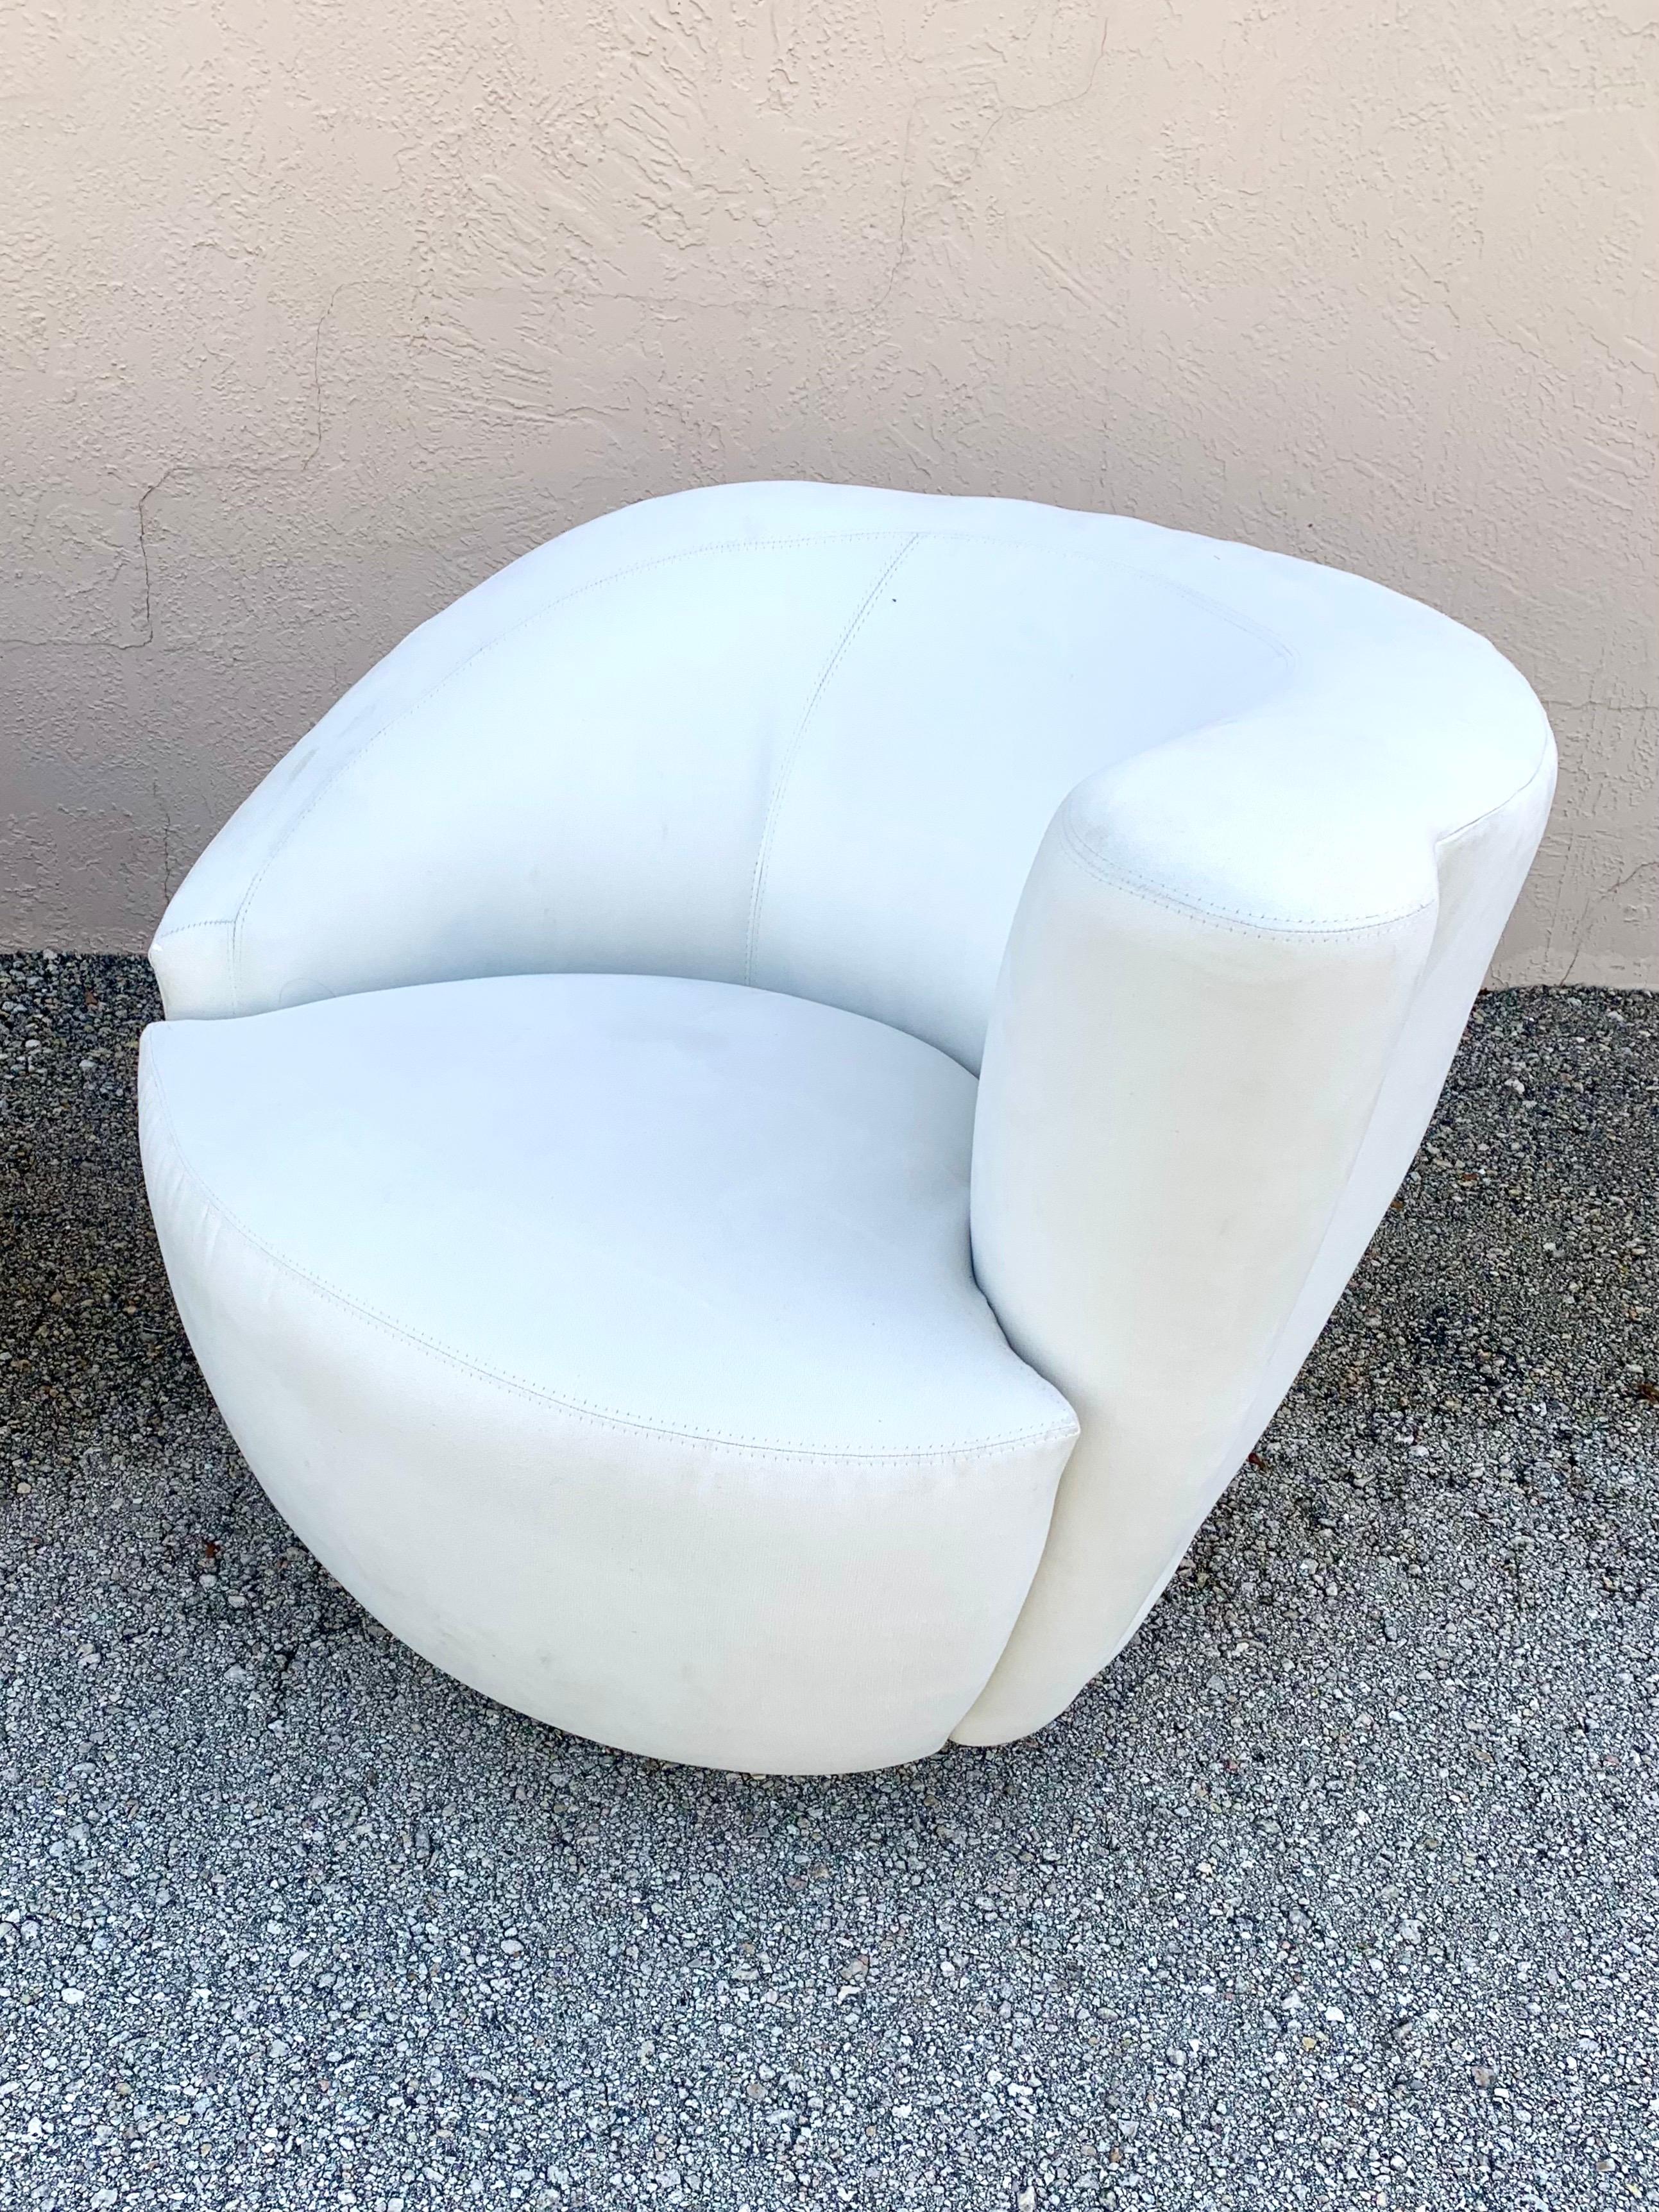 Pair of Mid-Century Modern style Nautilus swivel chairs. Gorgeous form and amazingly comfortable. Upholstery and foam are in great condition. Upholstery has a soft suede like feel to it. Chairs are not marked. No rips or stains. Upholstered bases.